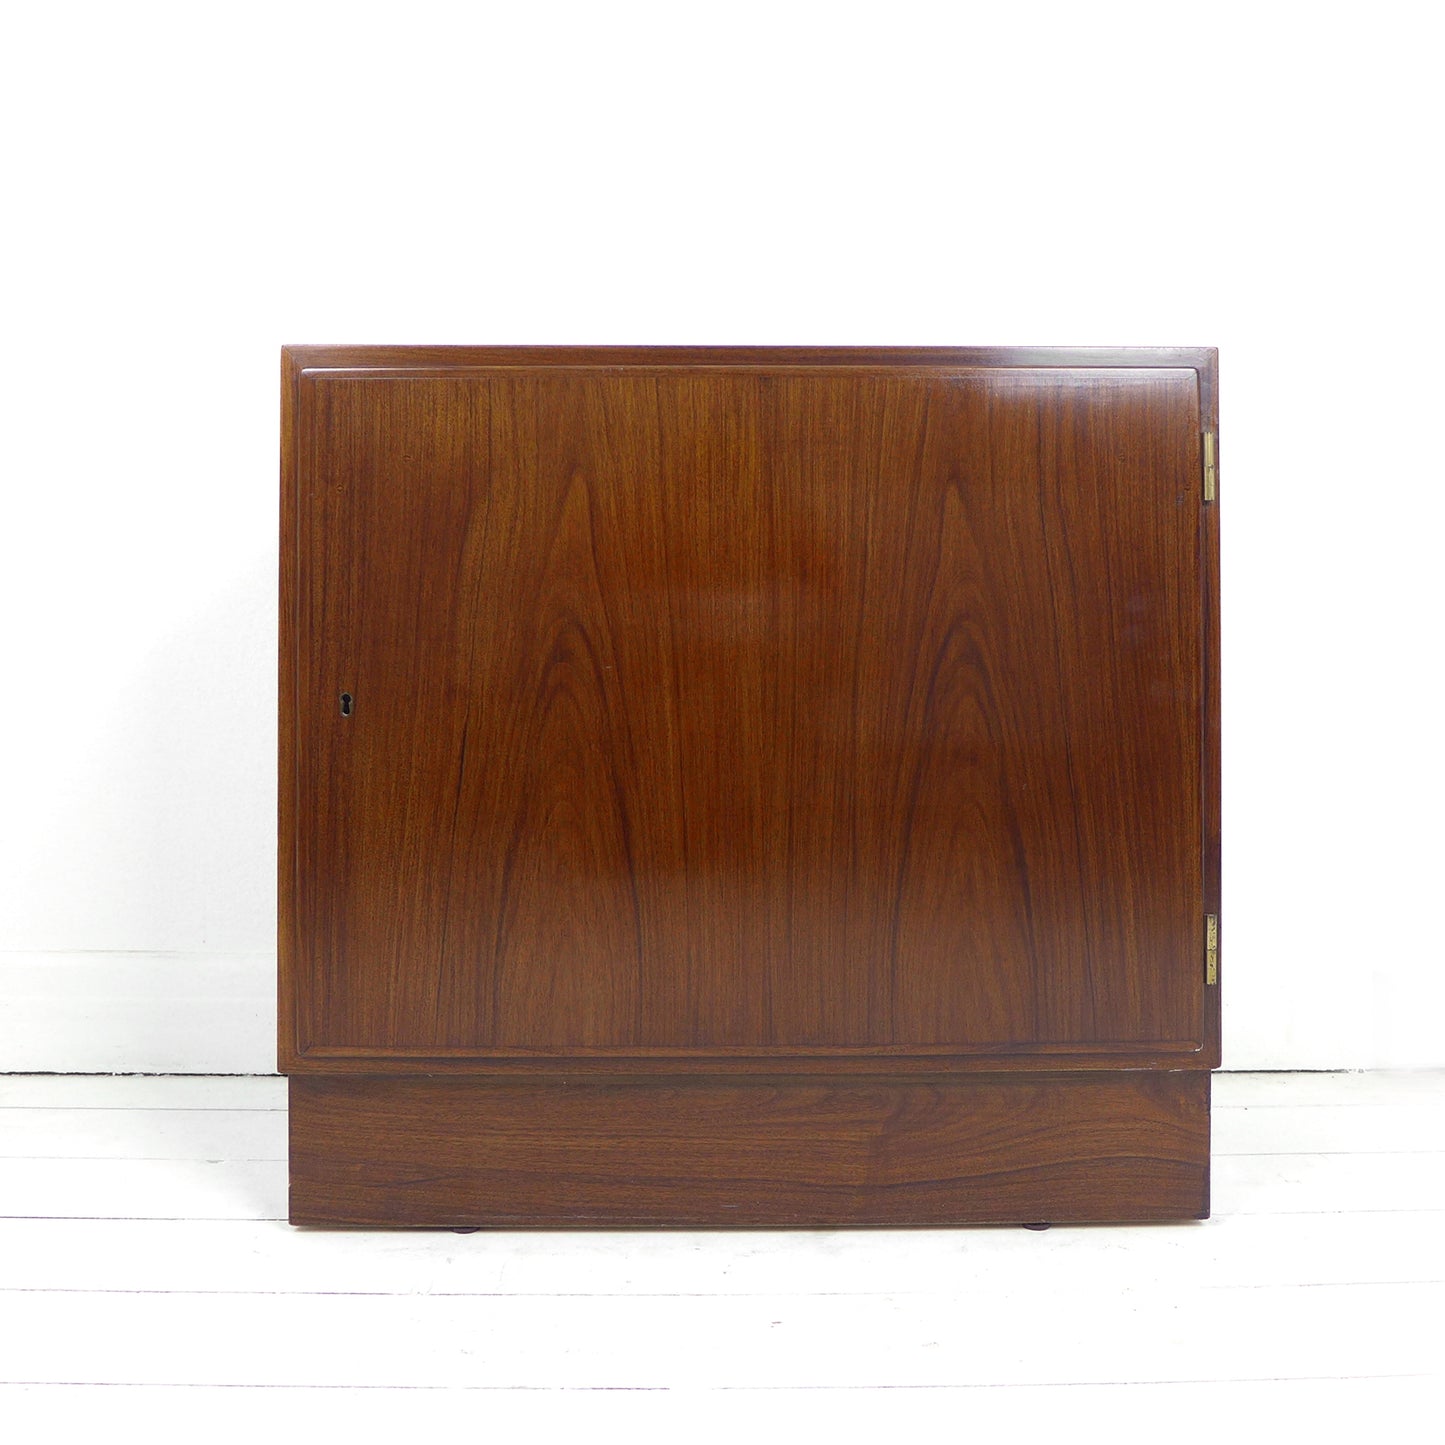 Danish Rosewood Record / Drinks Cabinet by Carlo Jensen for Hundevad & Co